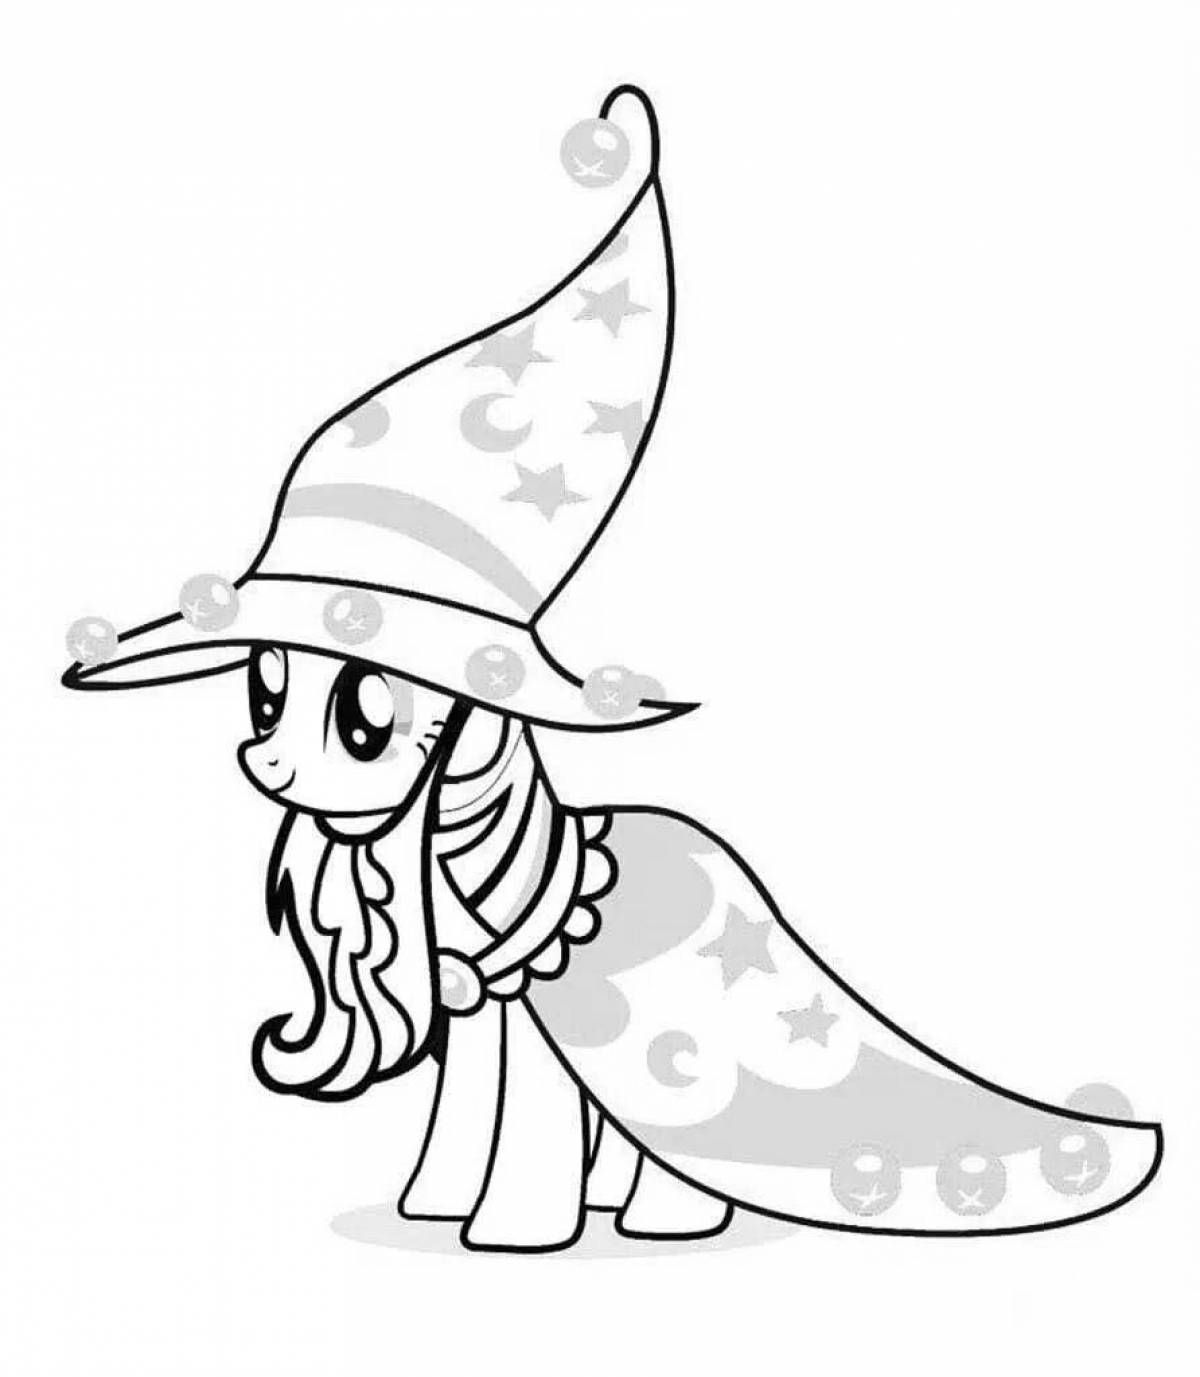 Trixie pony magic coloring page